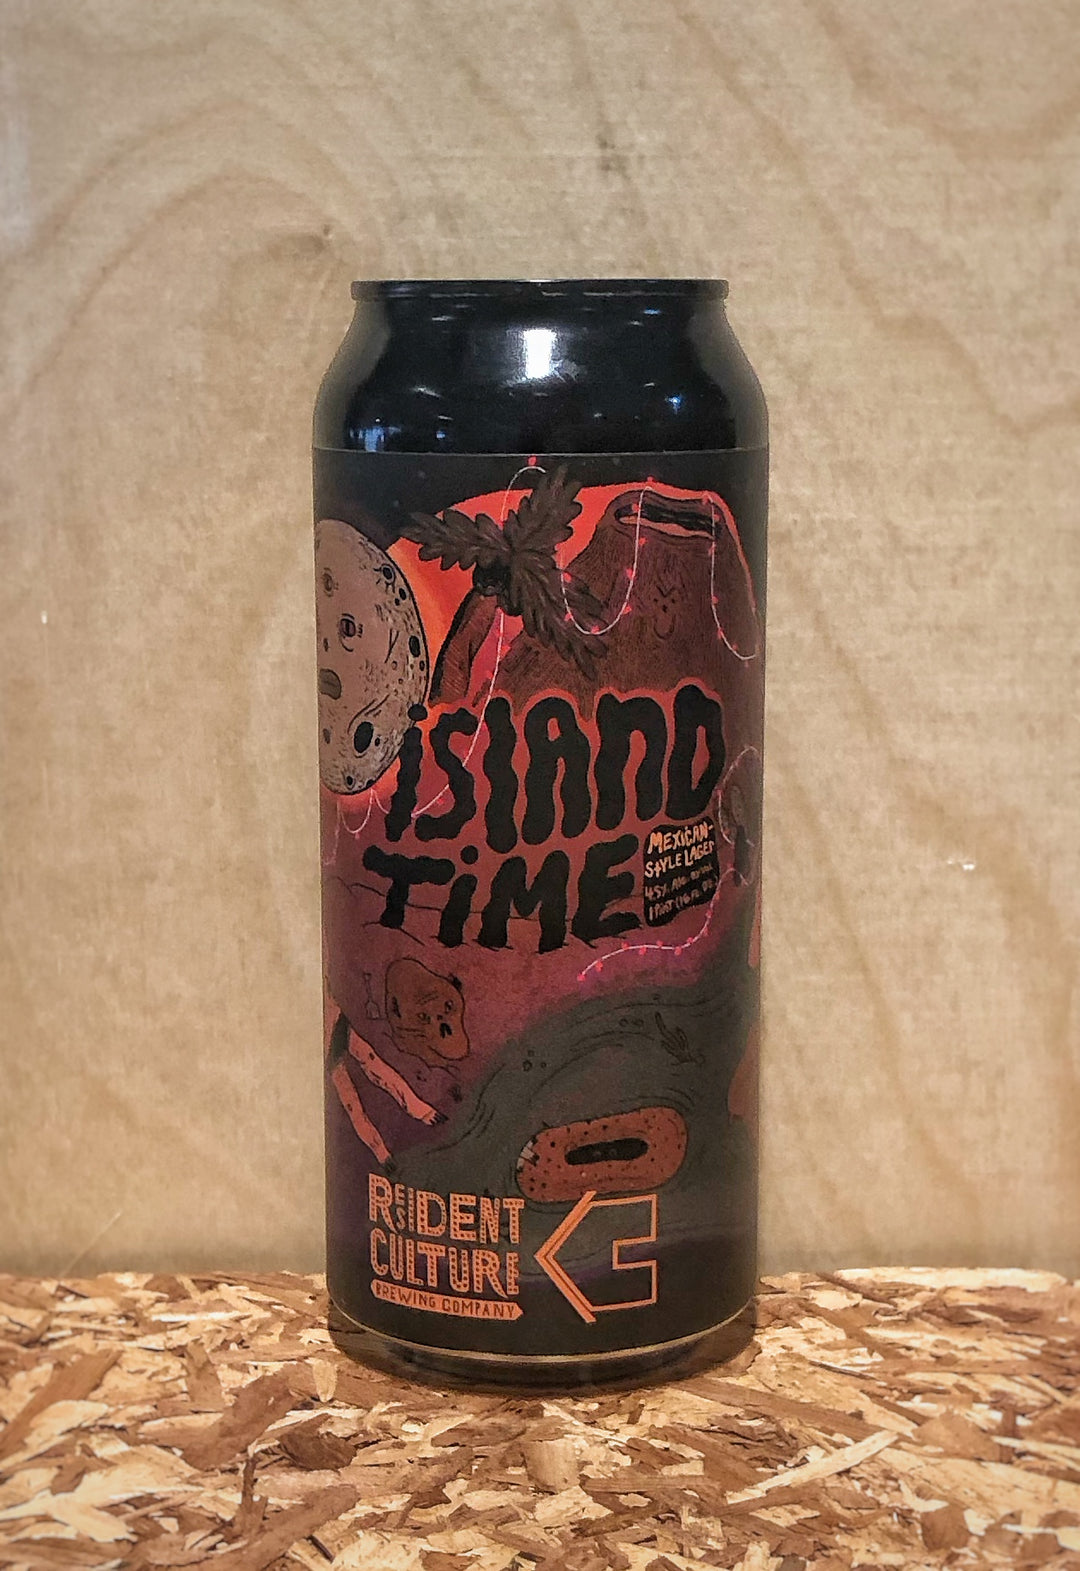 Resident Culture Brewing Co. 'Island Time' Mexican Style Lager with Lime (Charlotte, NC)